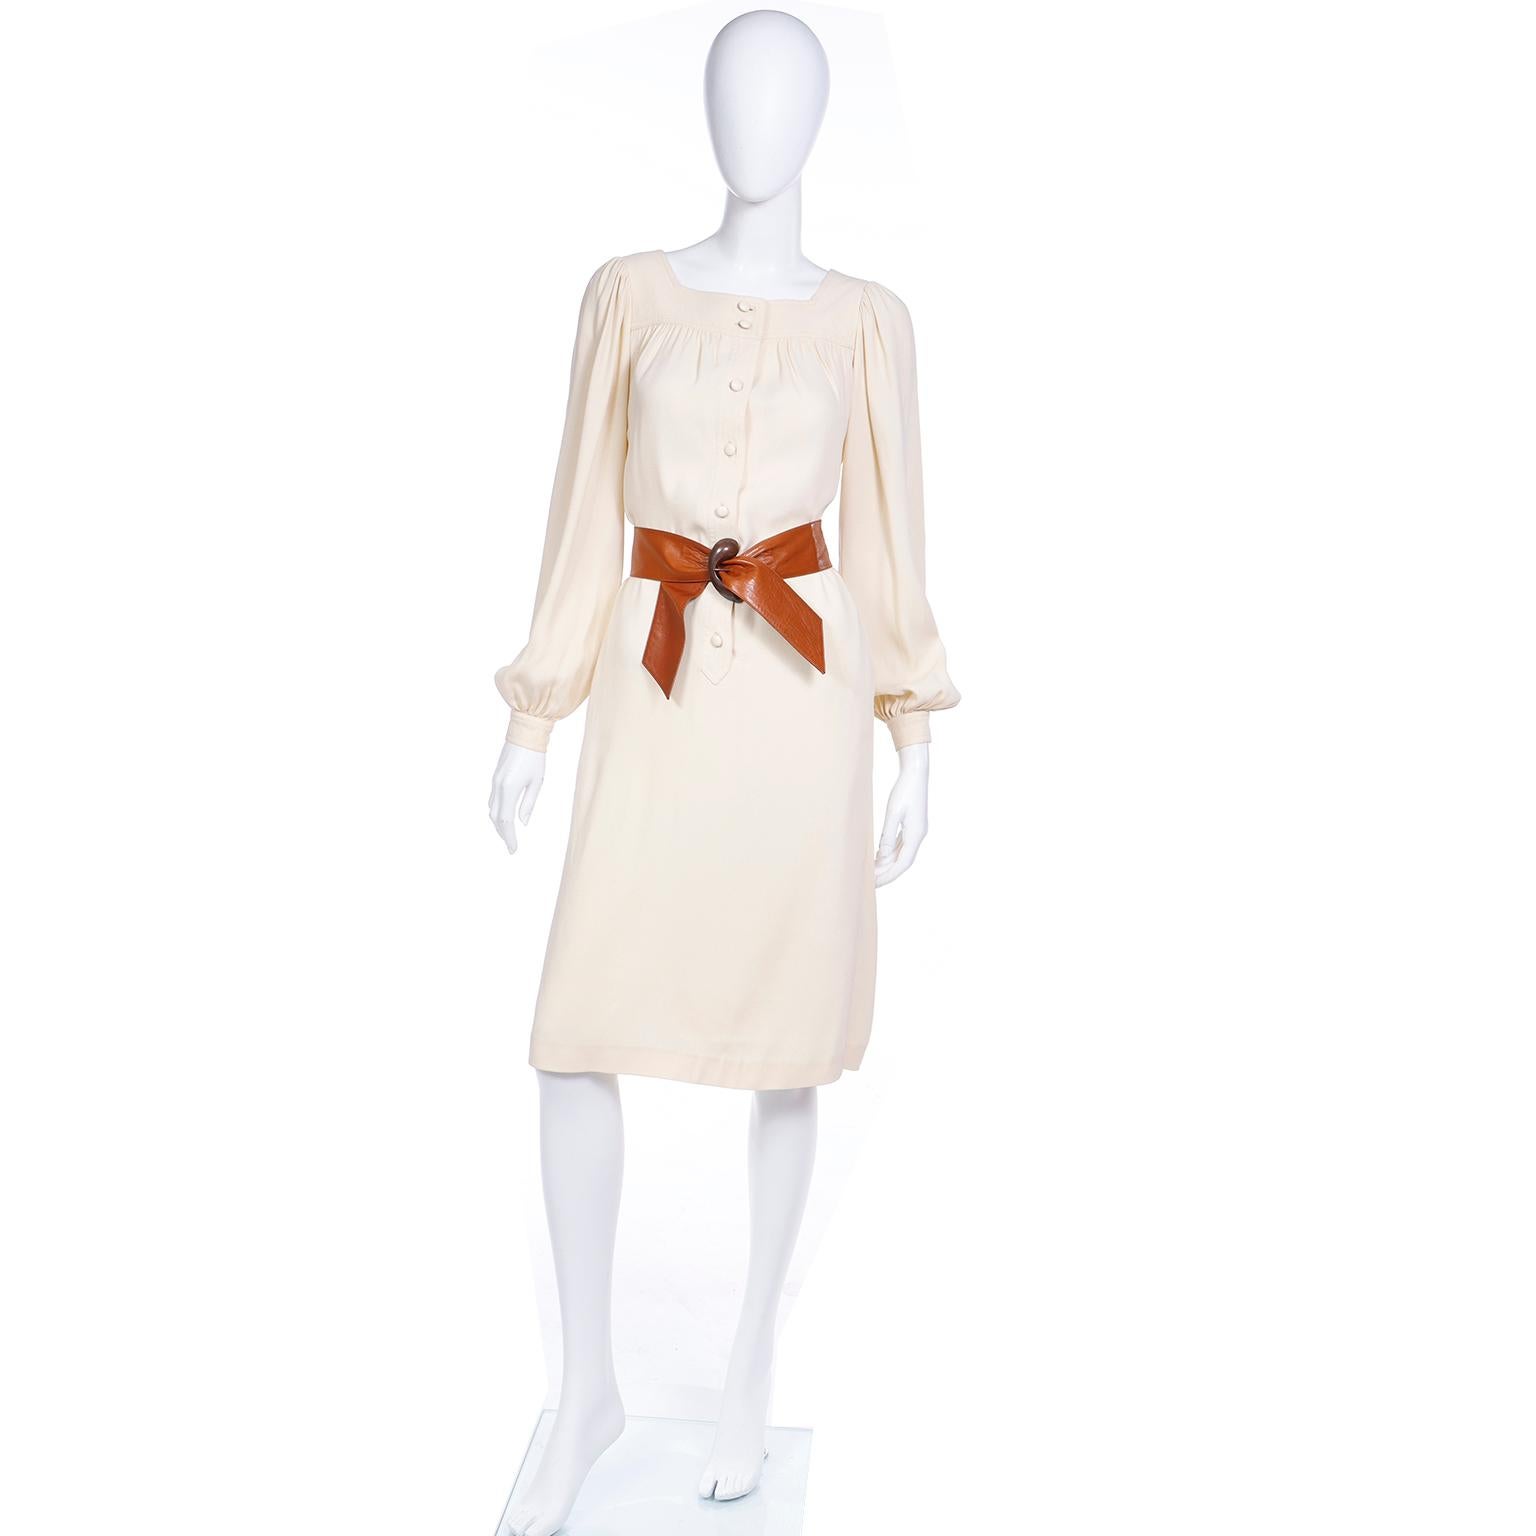 This is a classic example of a late 1970's Yves Saint Laurent smock dress, in a neutral light beige jersey fabric and featuring bishop-style sleeves. The dress bears the YSL signature pleating at the yoke and is embellished with round cream plastic